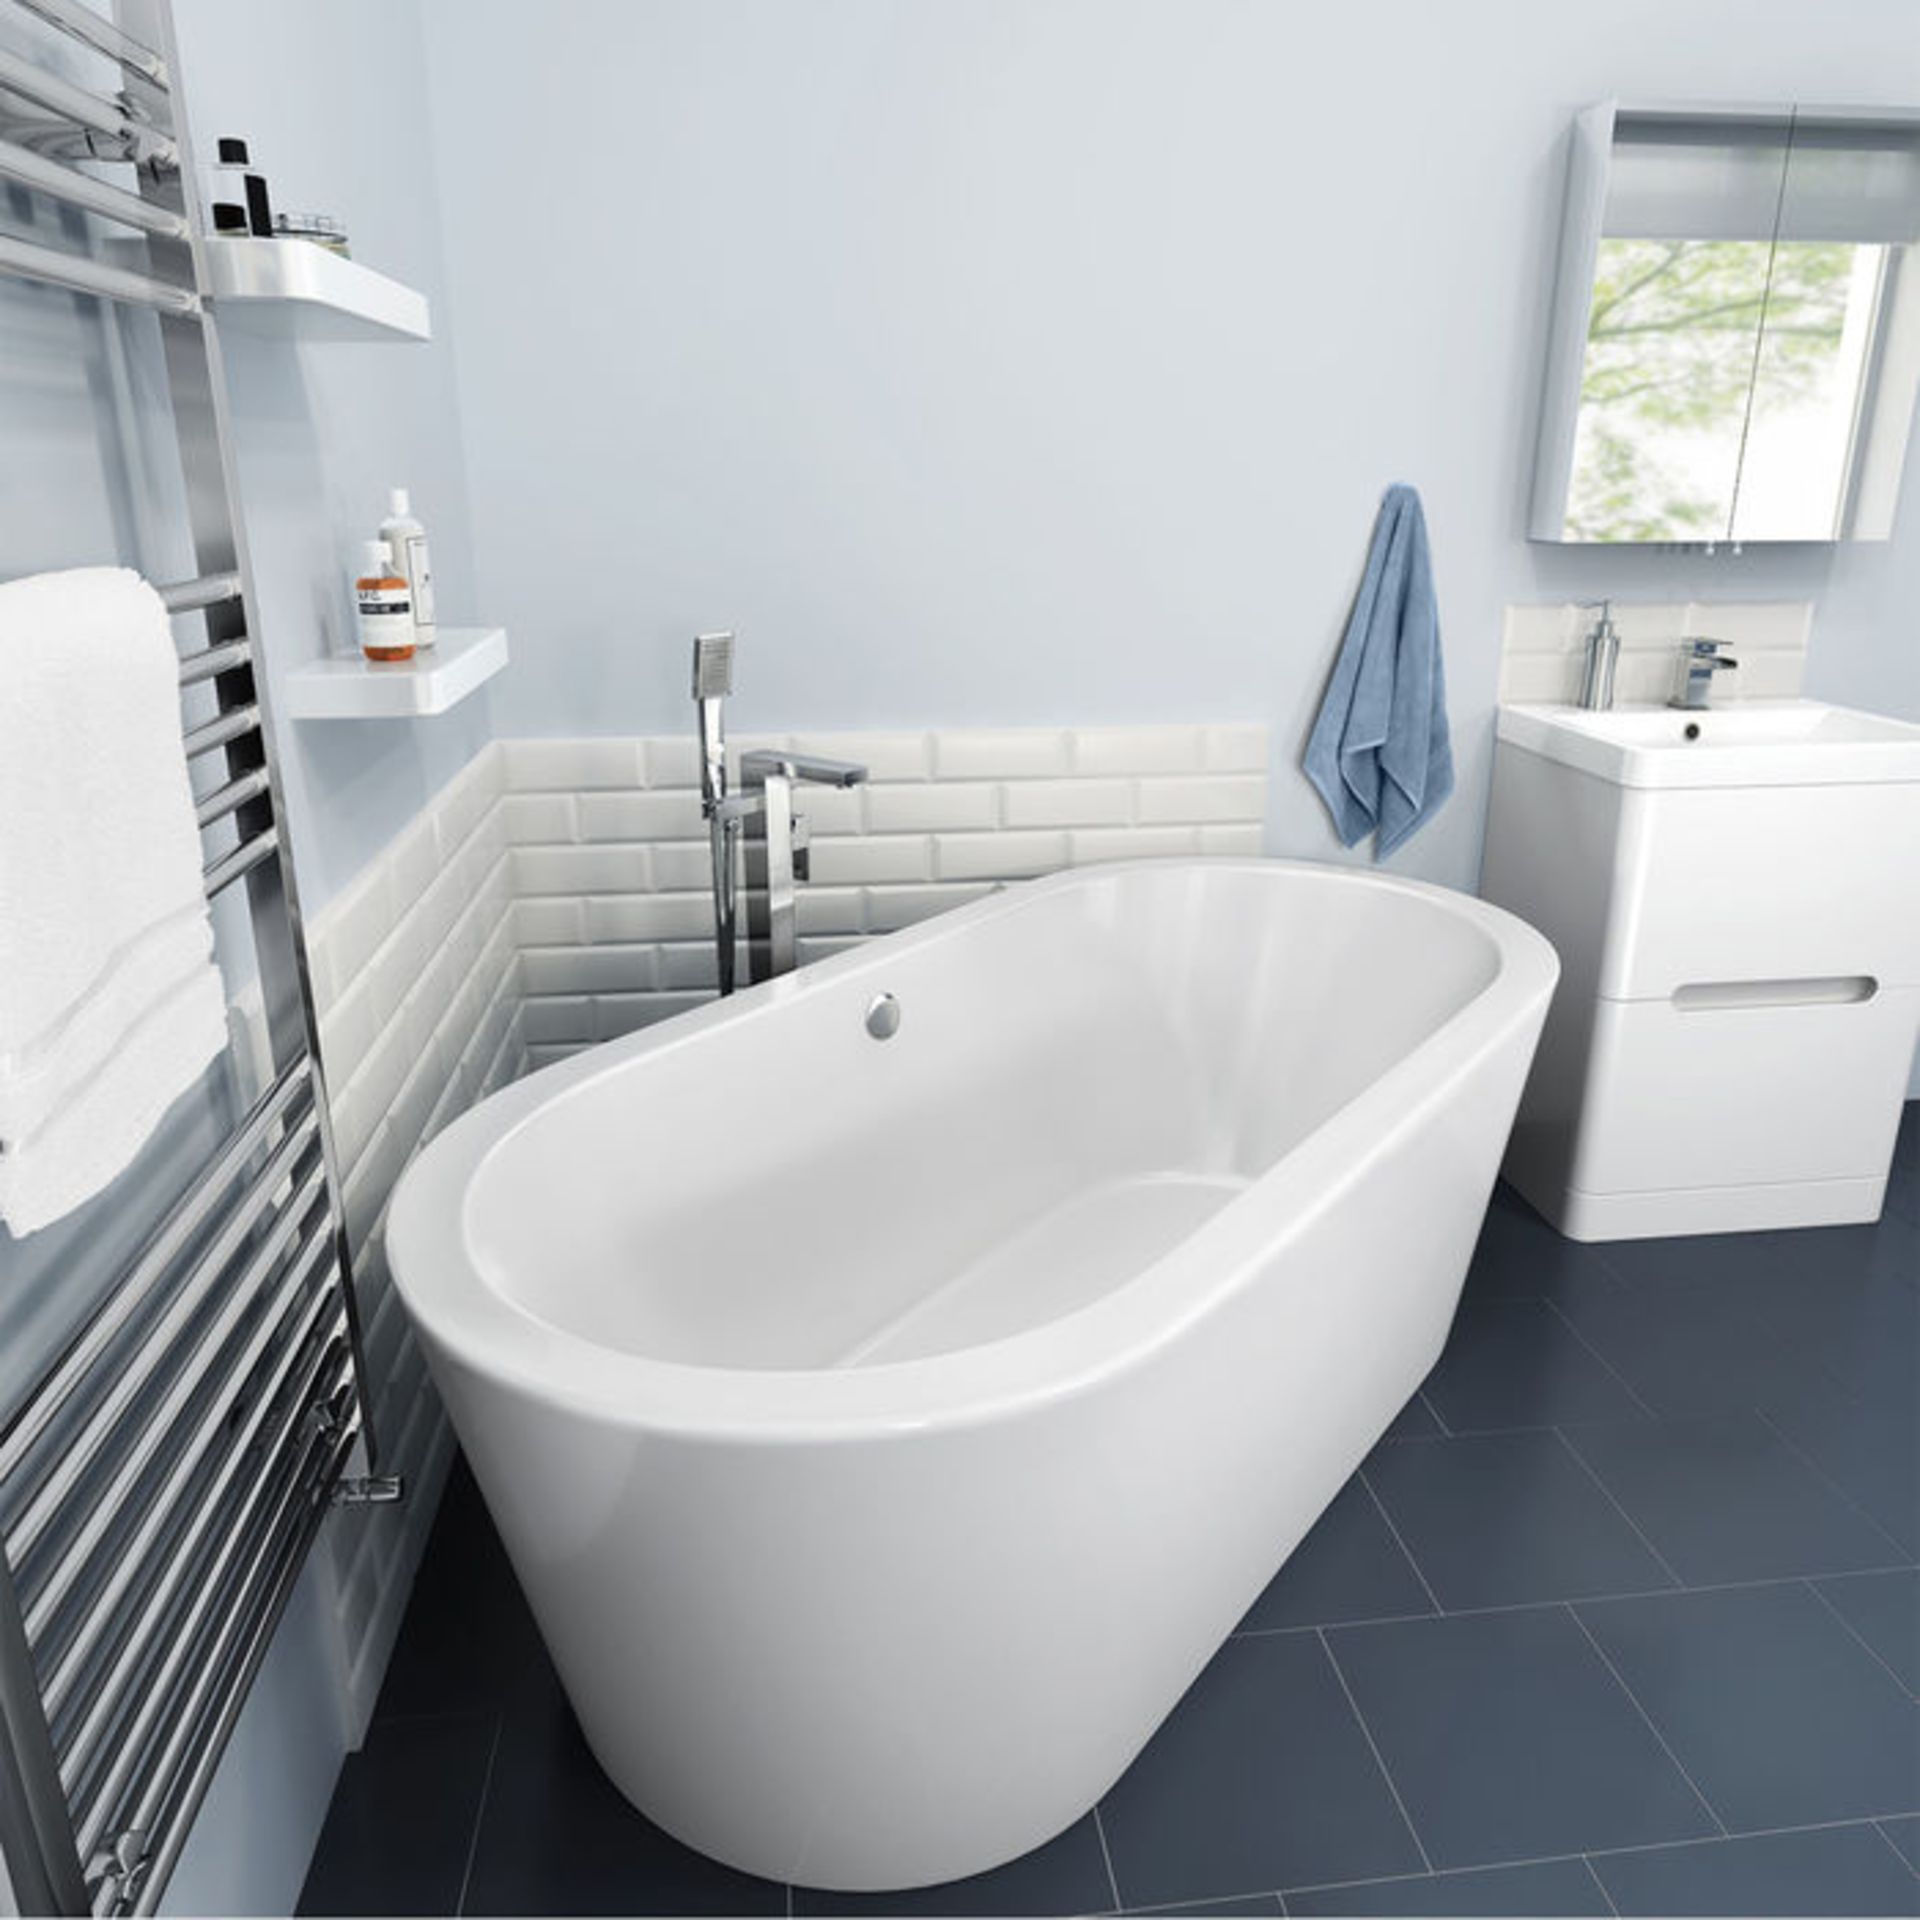 (GR176) 1700X800mm Isla Freestanding Bath. Manufactured from High Quality Acrylic, complimented by a - Image 4 of 5